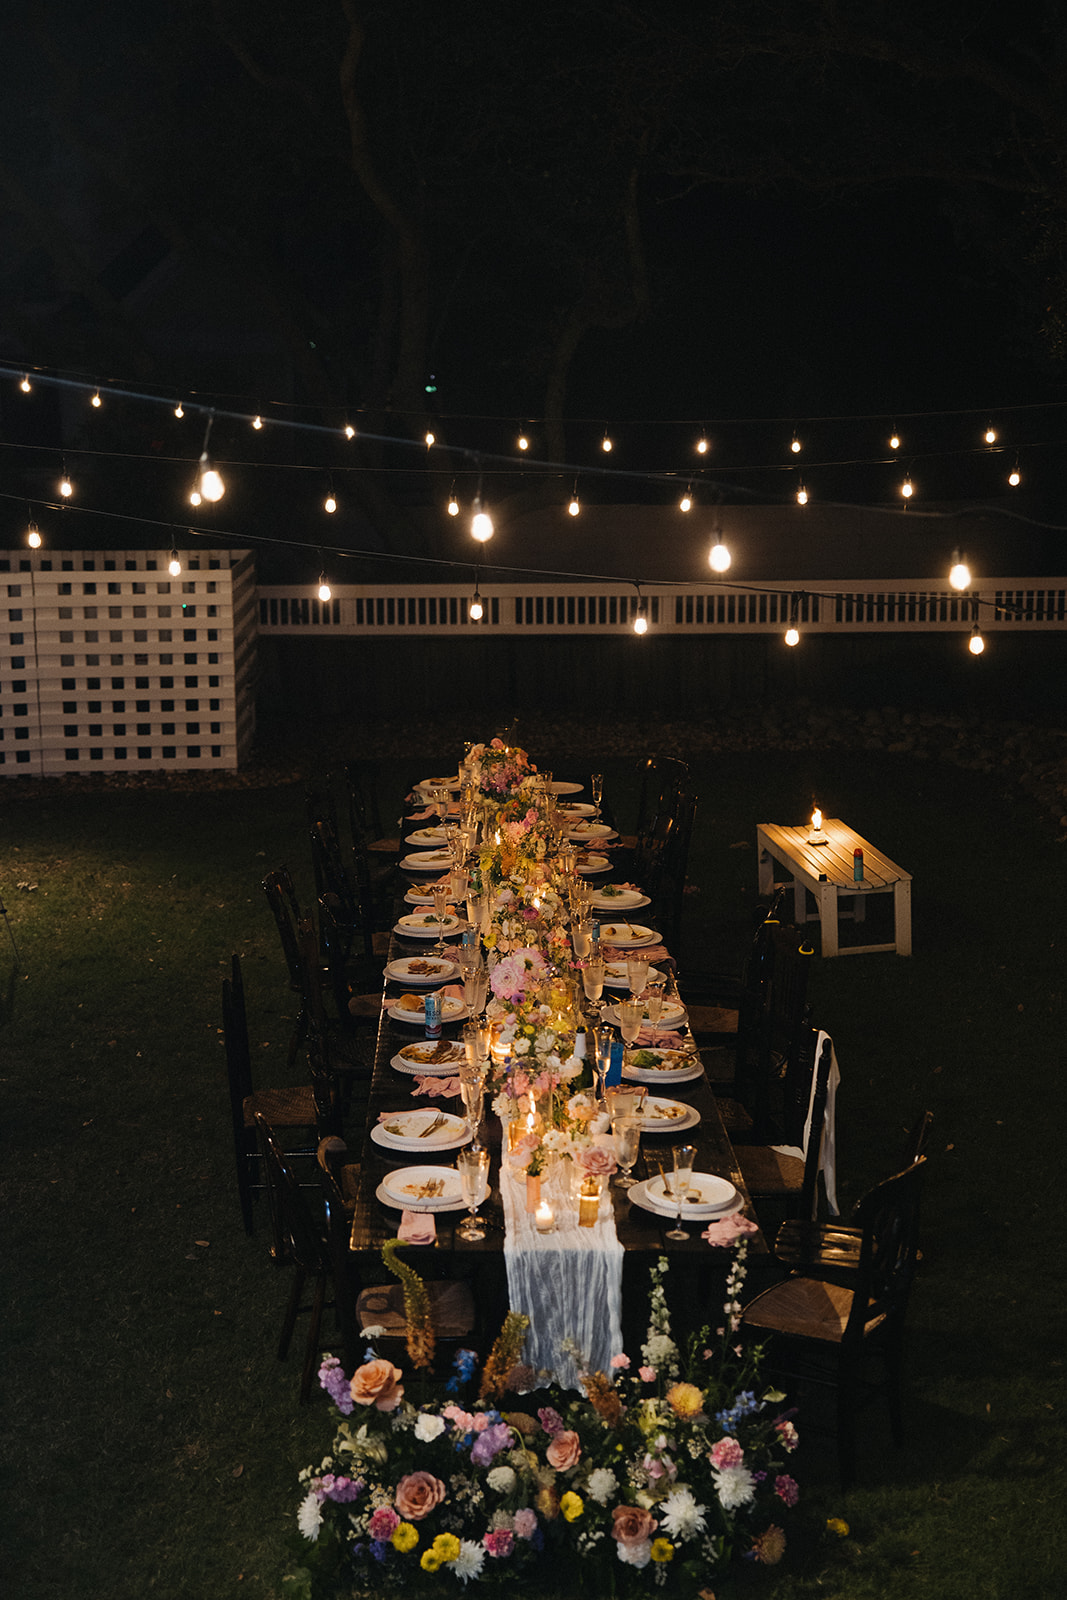 floral decor on long table with lights at backyard wedding reception